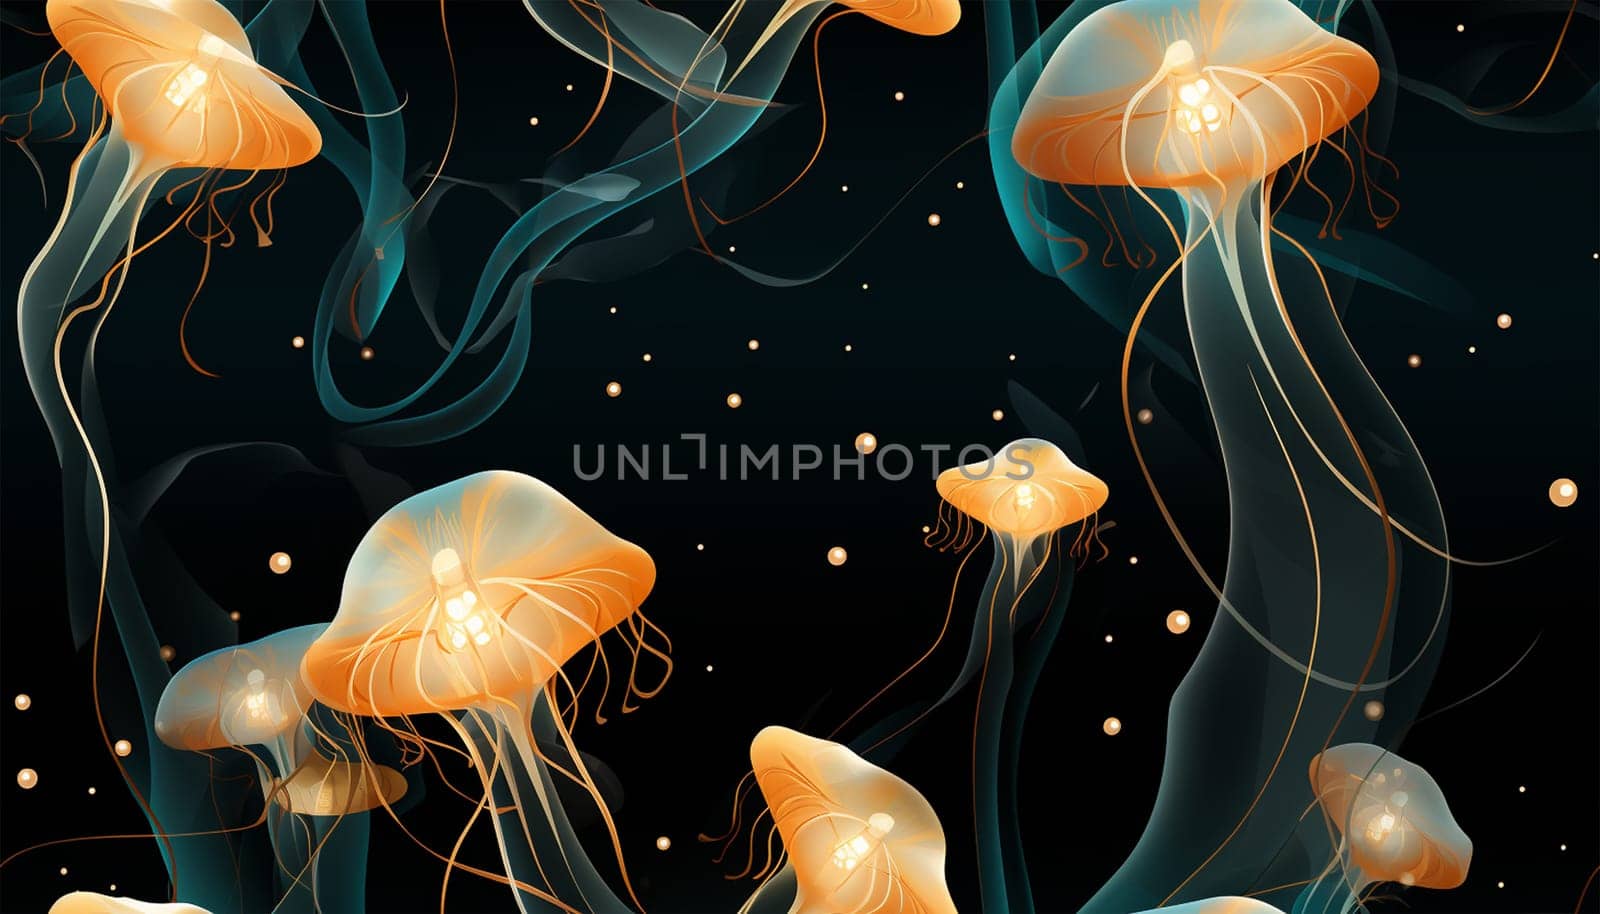 Jellyfish seamless pattern. Dark luxury art background with hand drawn jellyfish in gold art line style. Minimalistic banner with marine life for decoration, wallpaper, print, textile, interior design, packaging by Annebel146